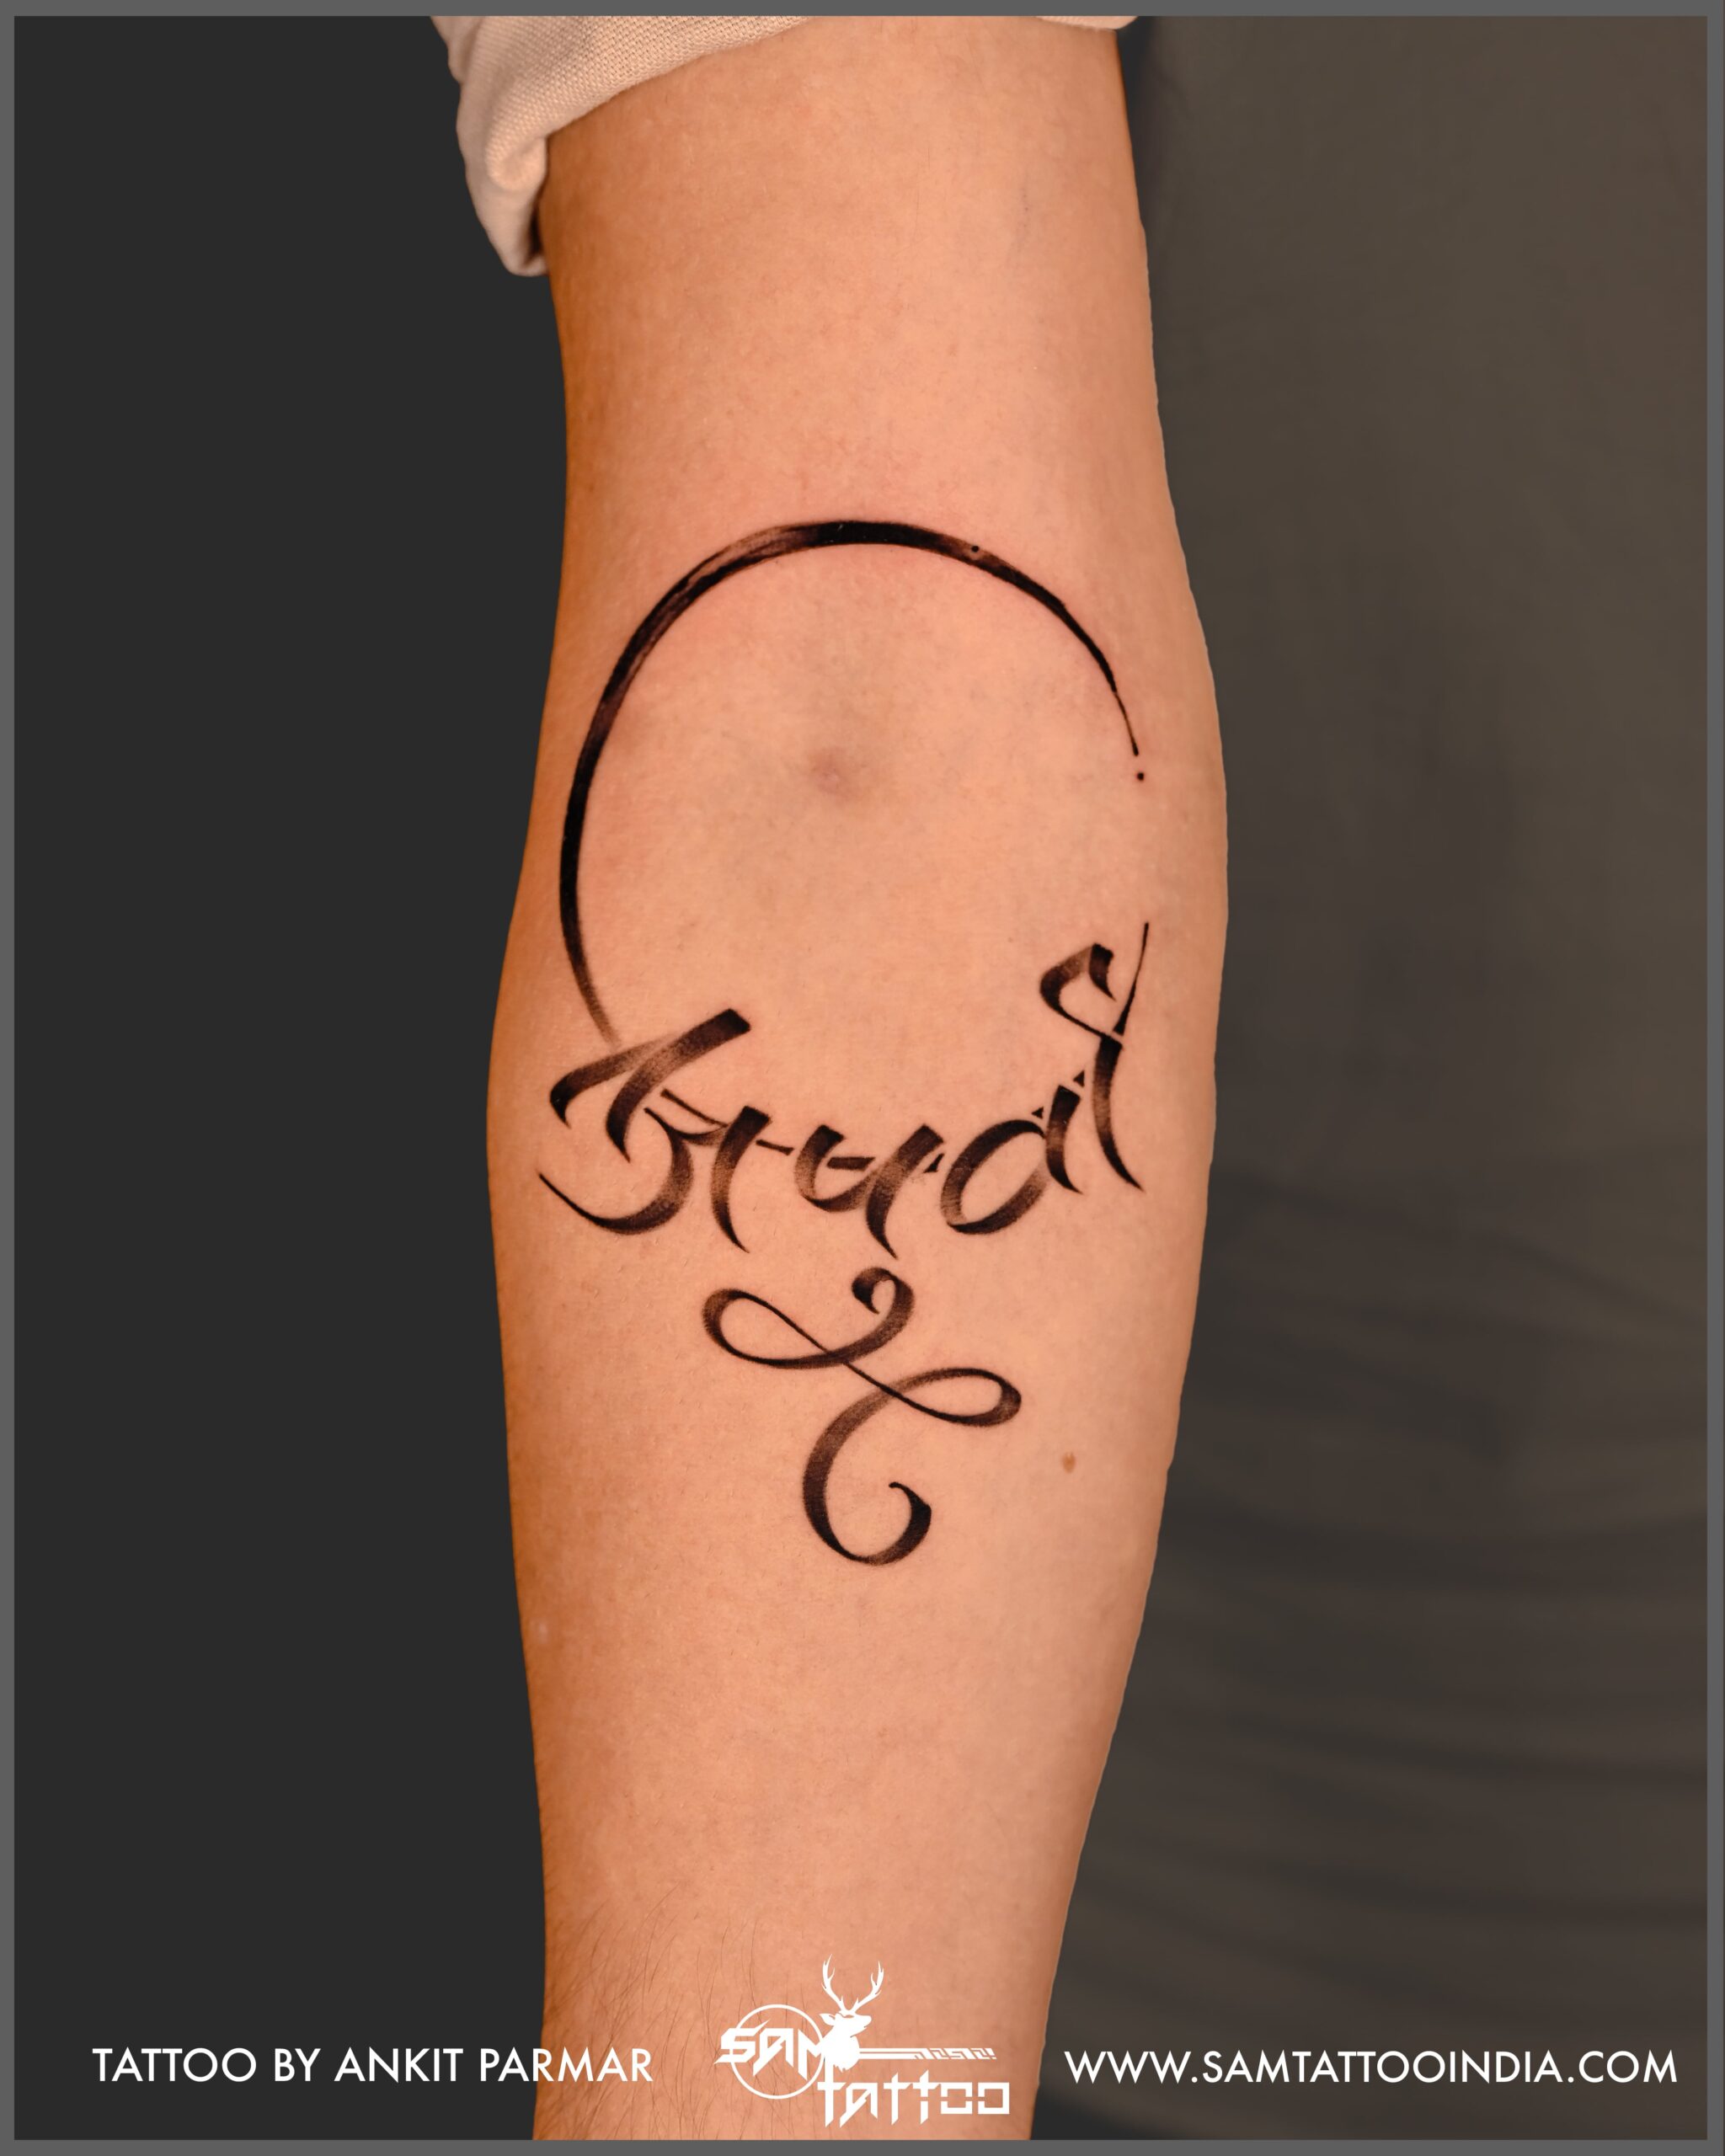 Ankit   tattoo words download free scetch